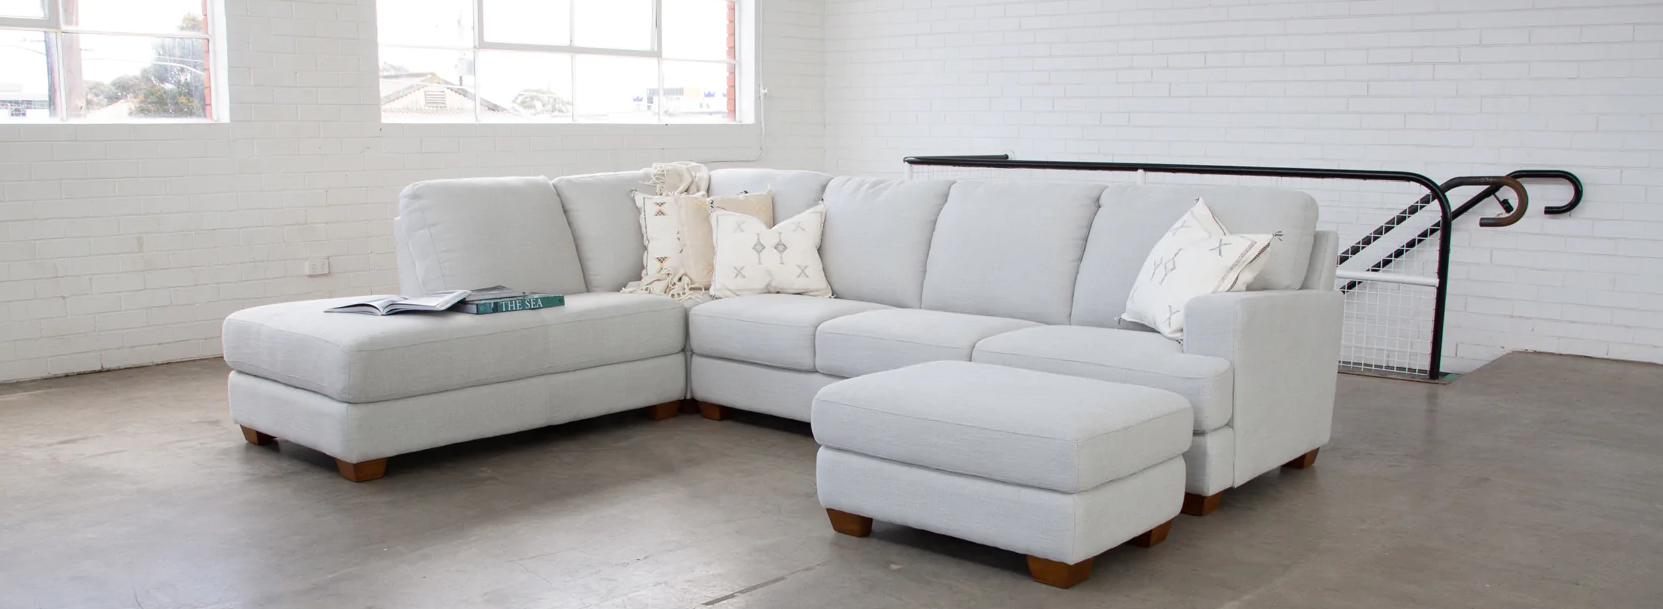 Save up to 40% off absolutely everything this EOFY at Secret Sofa